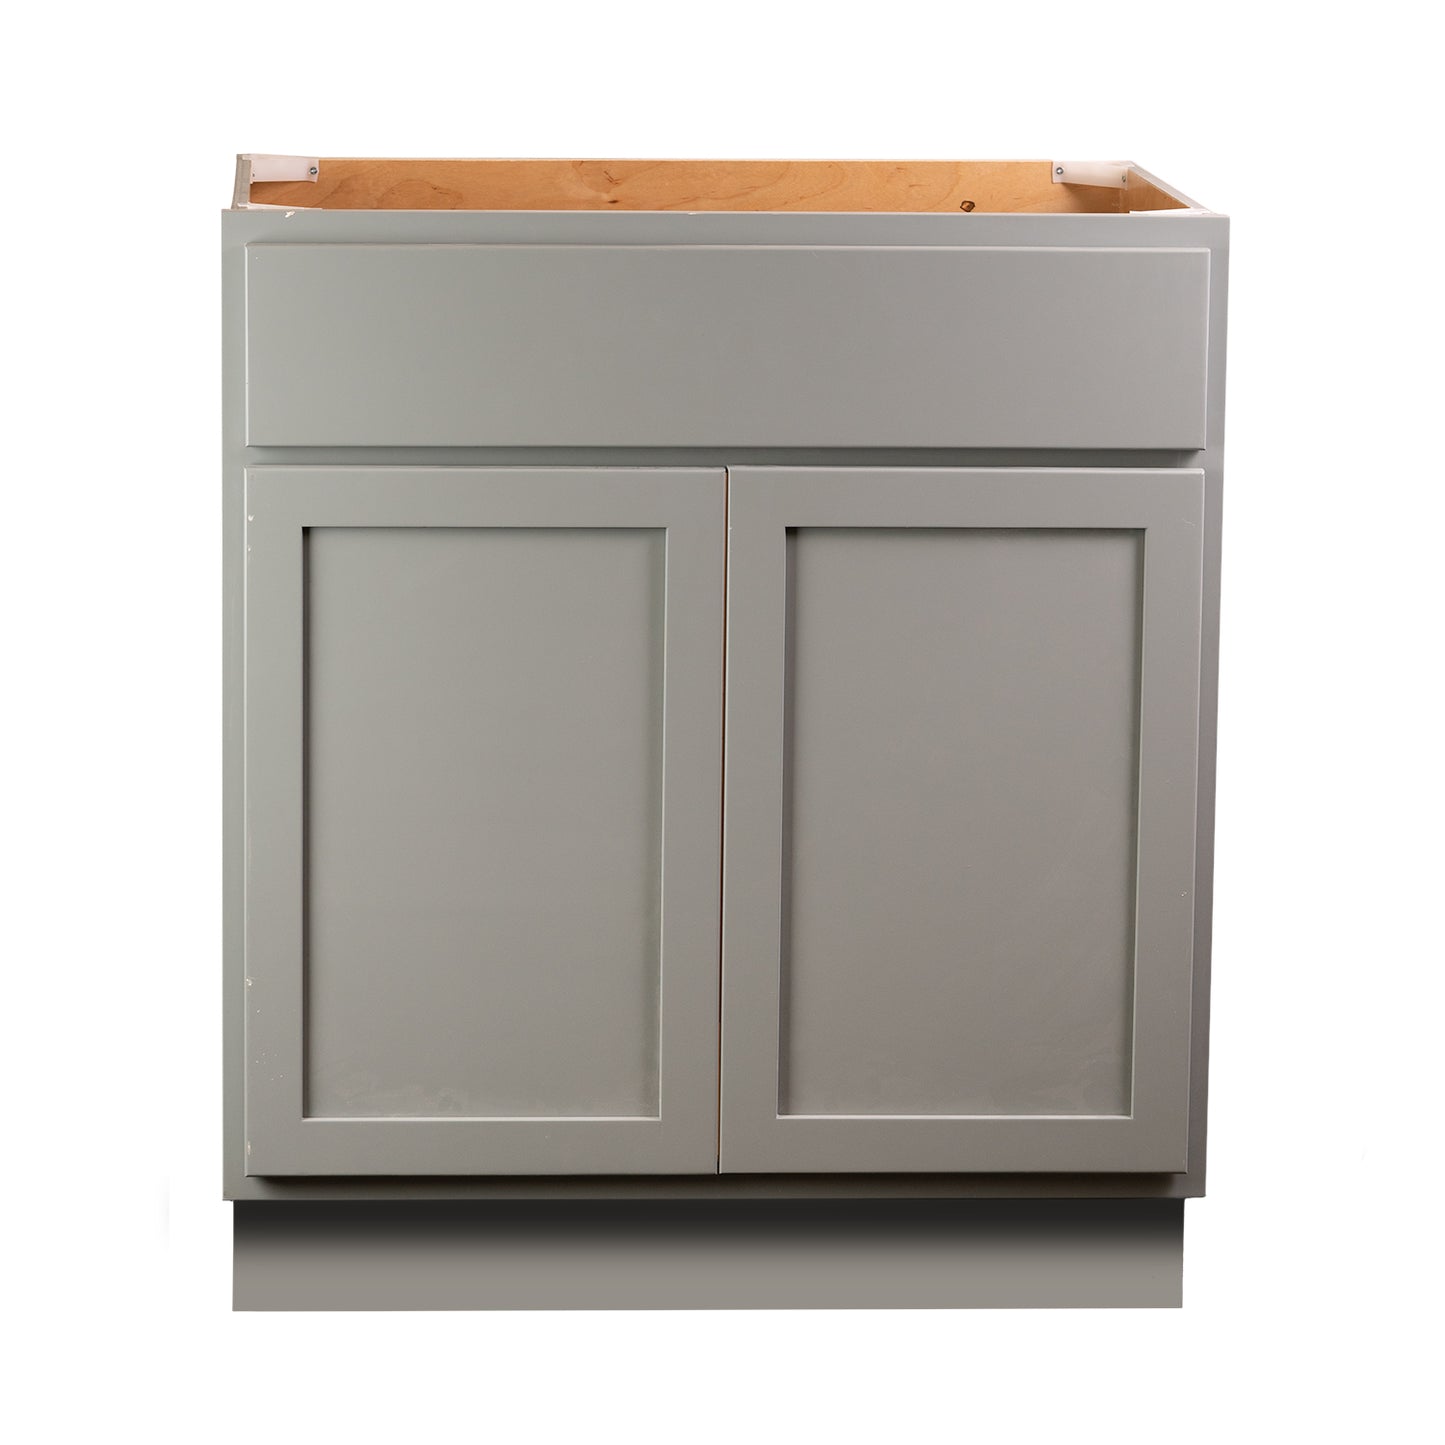 Quicklock RTA (Ready-to-Assemble) Magnetic Grey Vanity Base Cabinet | 42"Wx34.5"Hx21"D